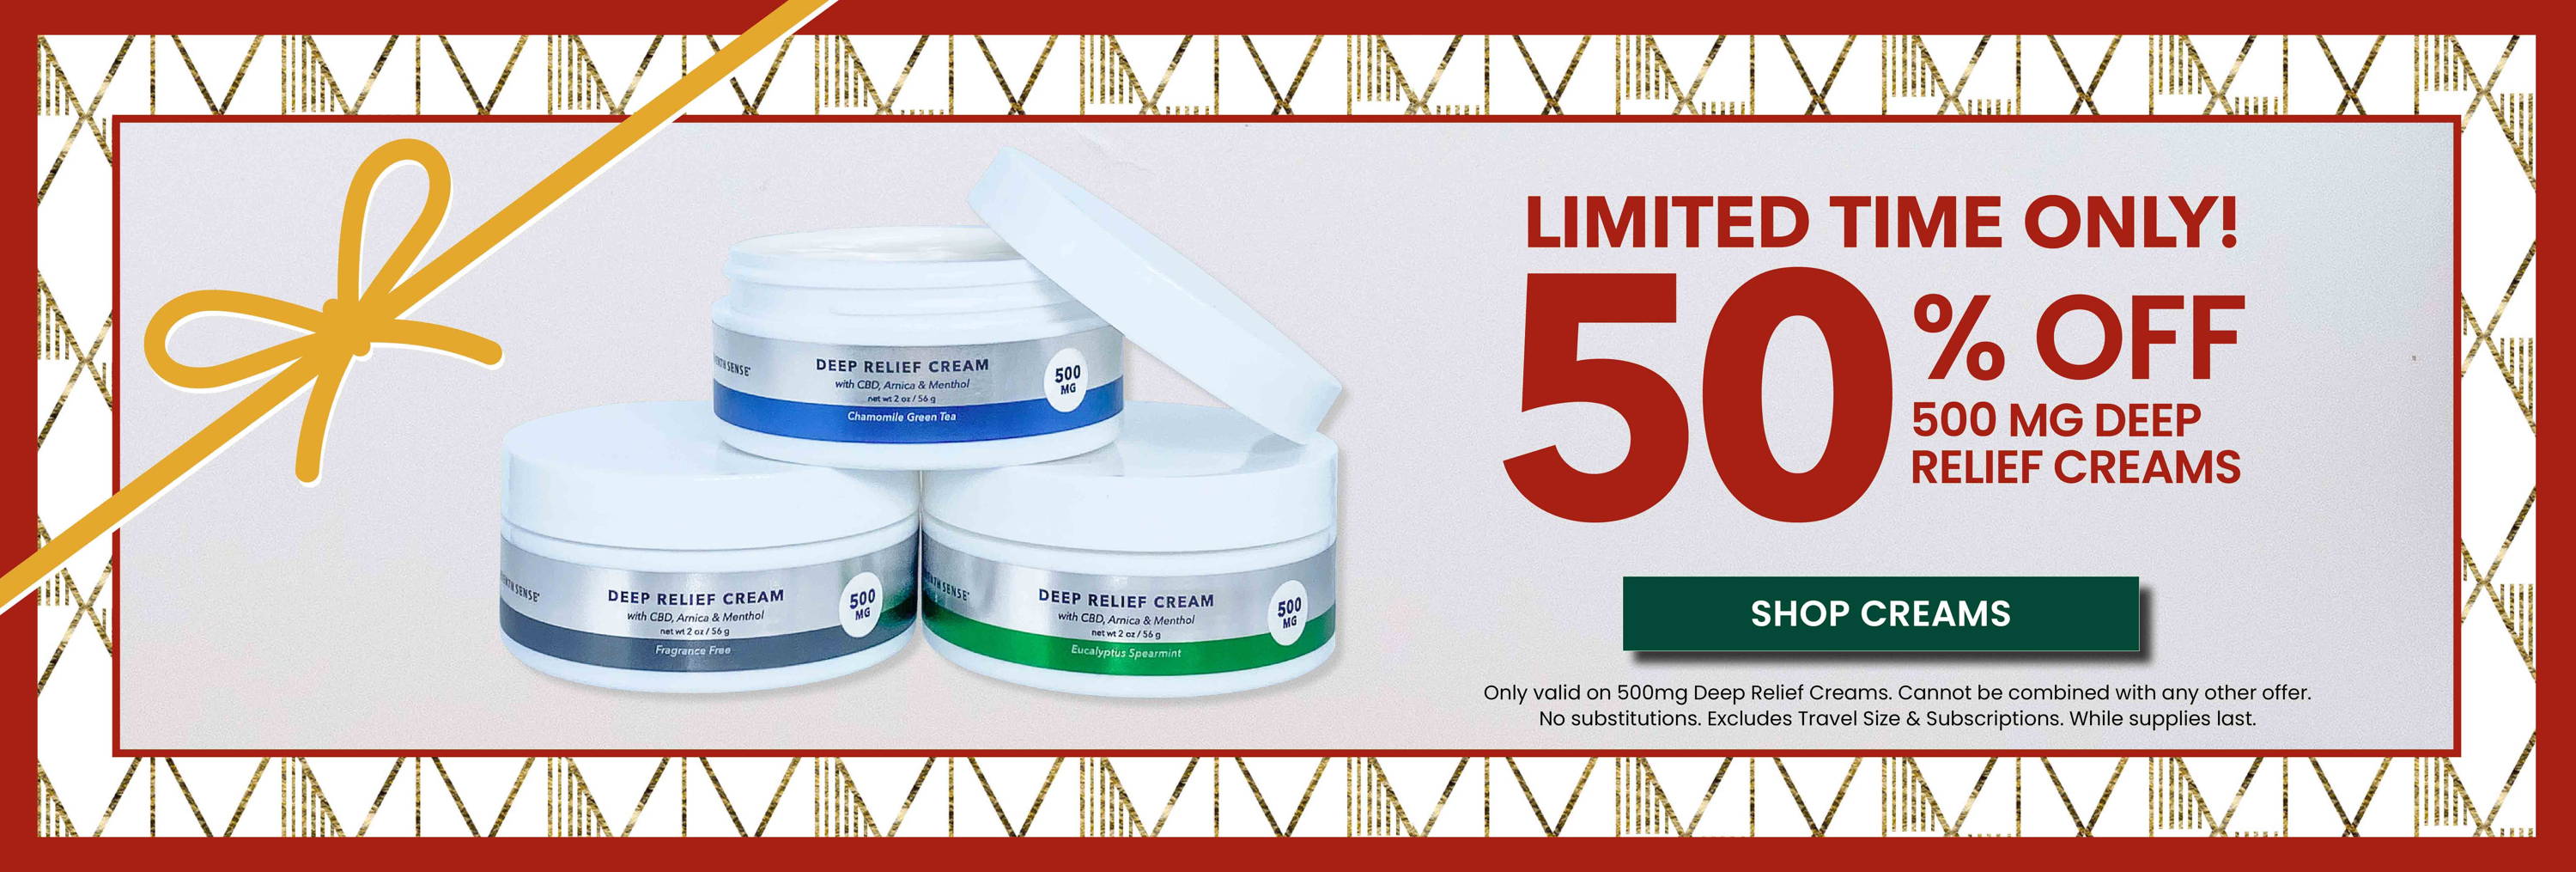 Limited Time Only! 50% Off 500mg Deep Relief Creams.